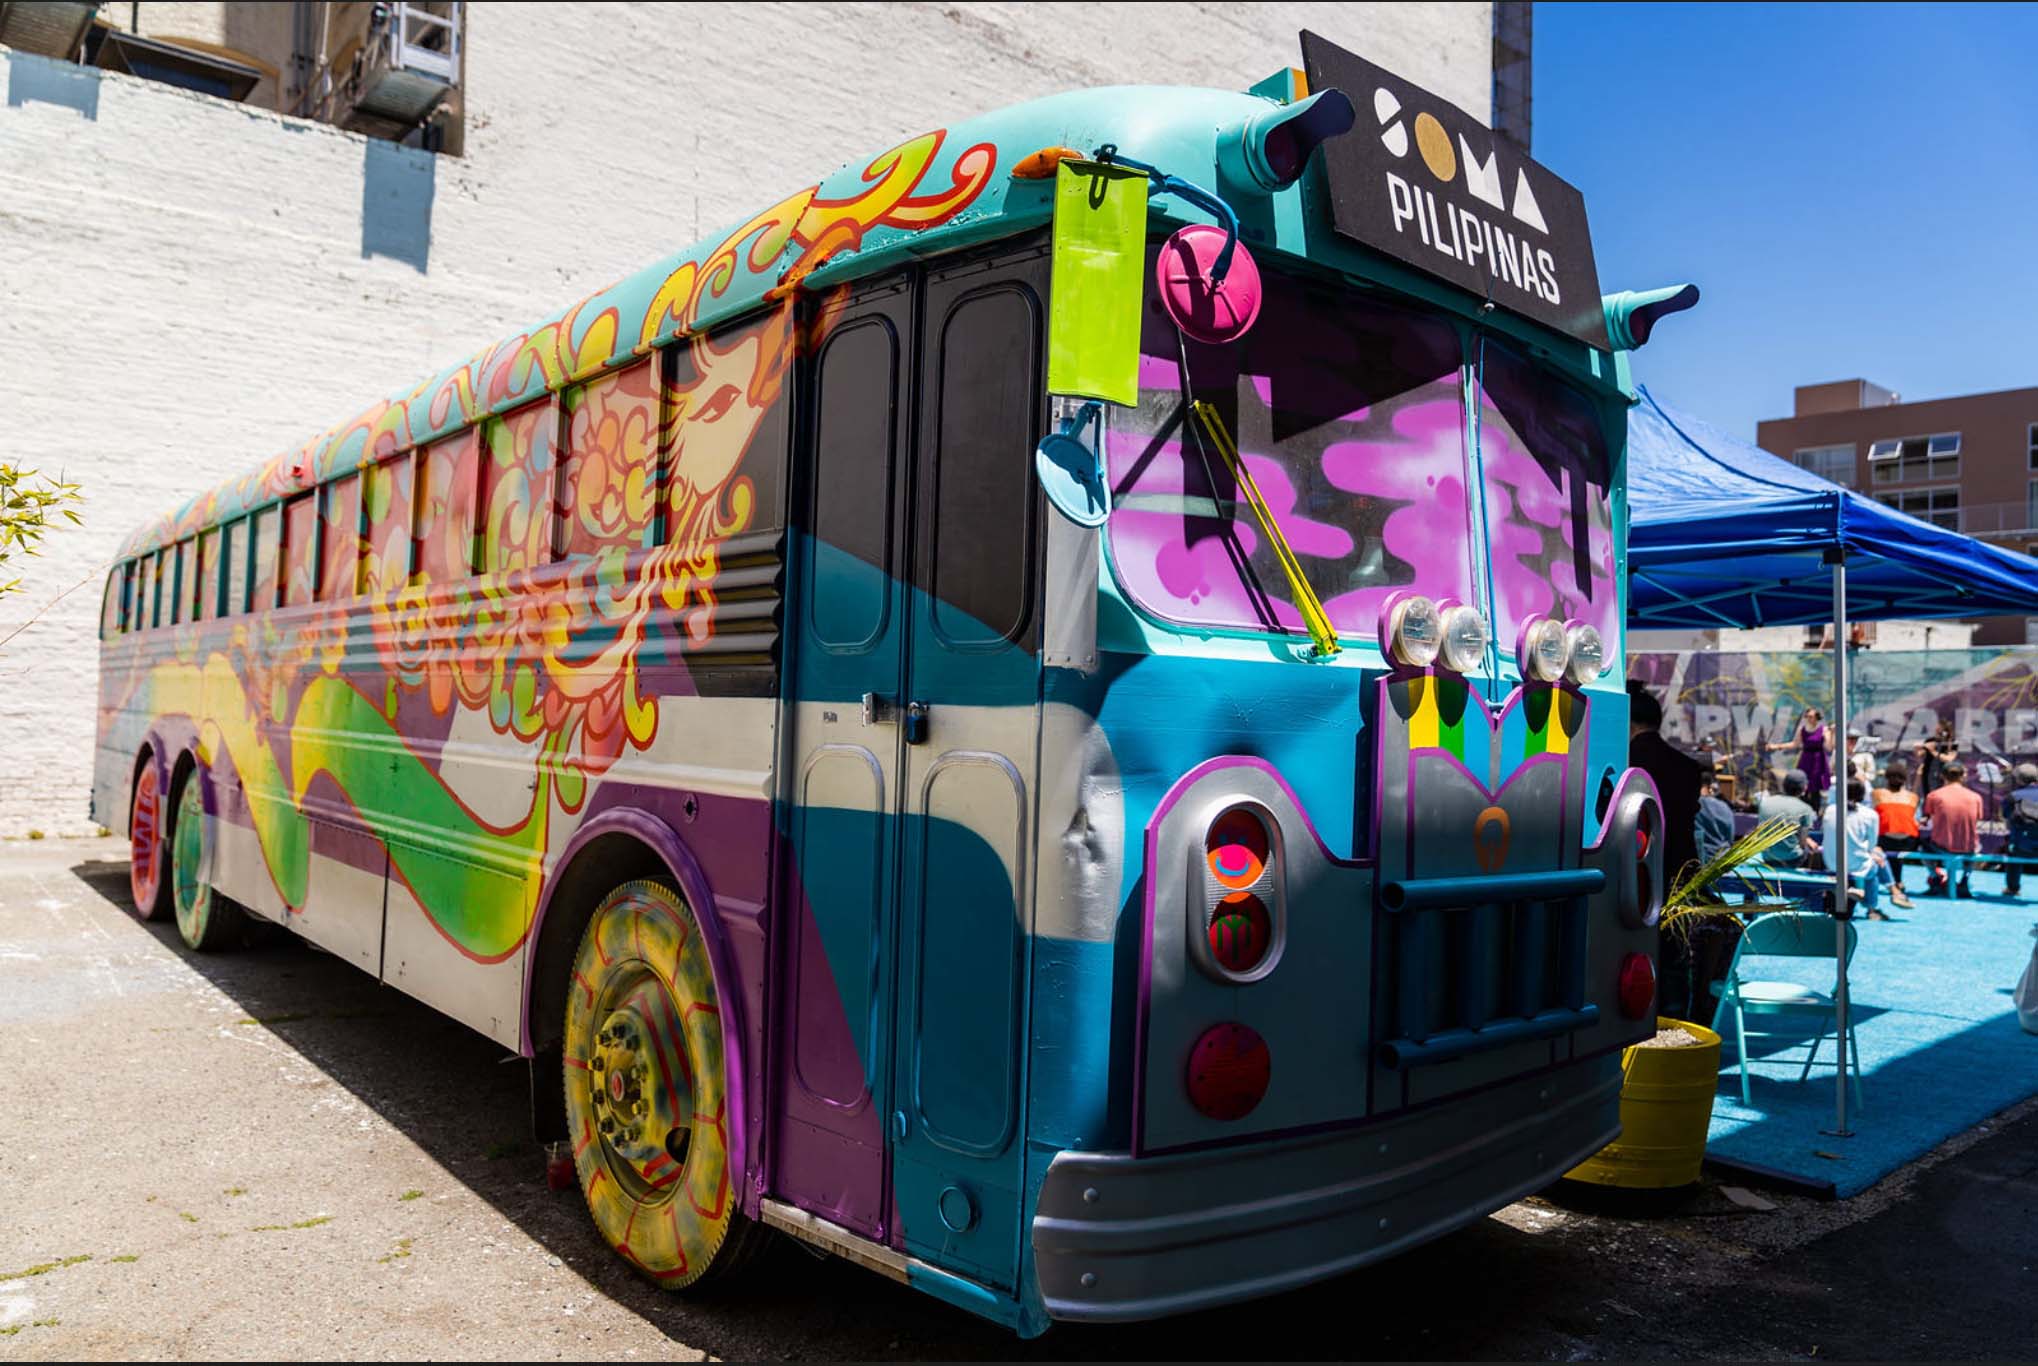 Colorfully painted bus with a "SOMA Pilipinas" sign in front.